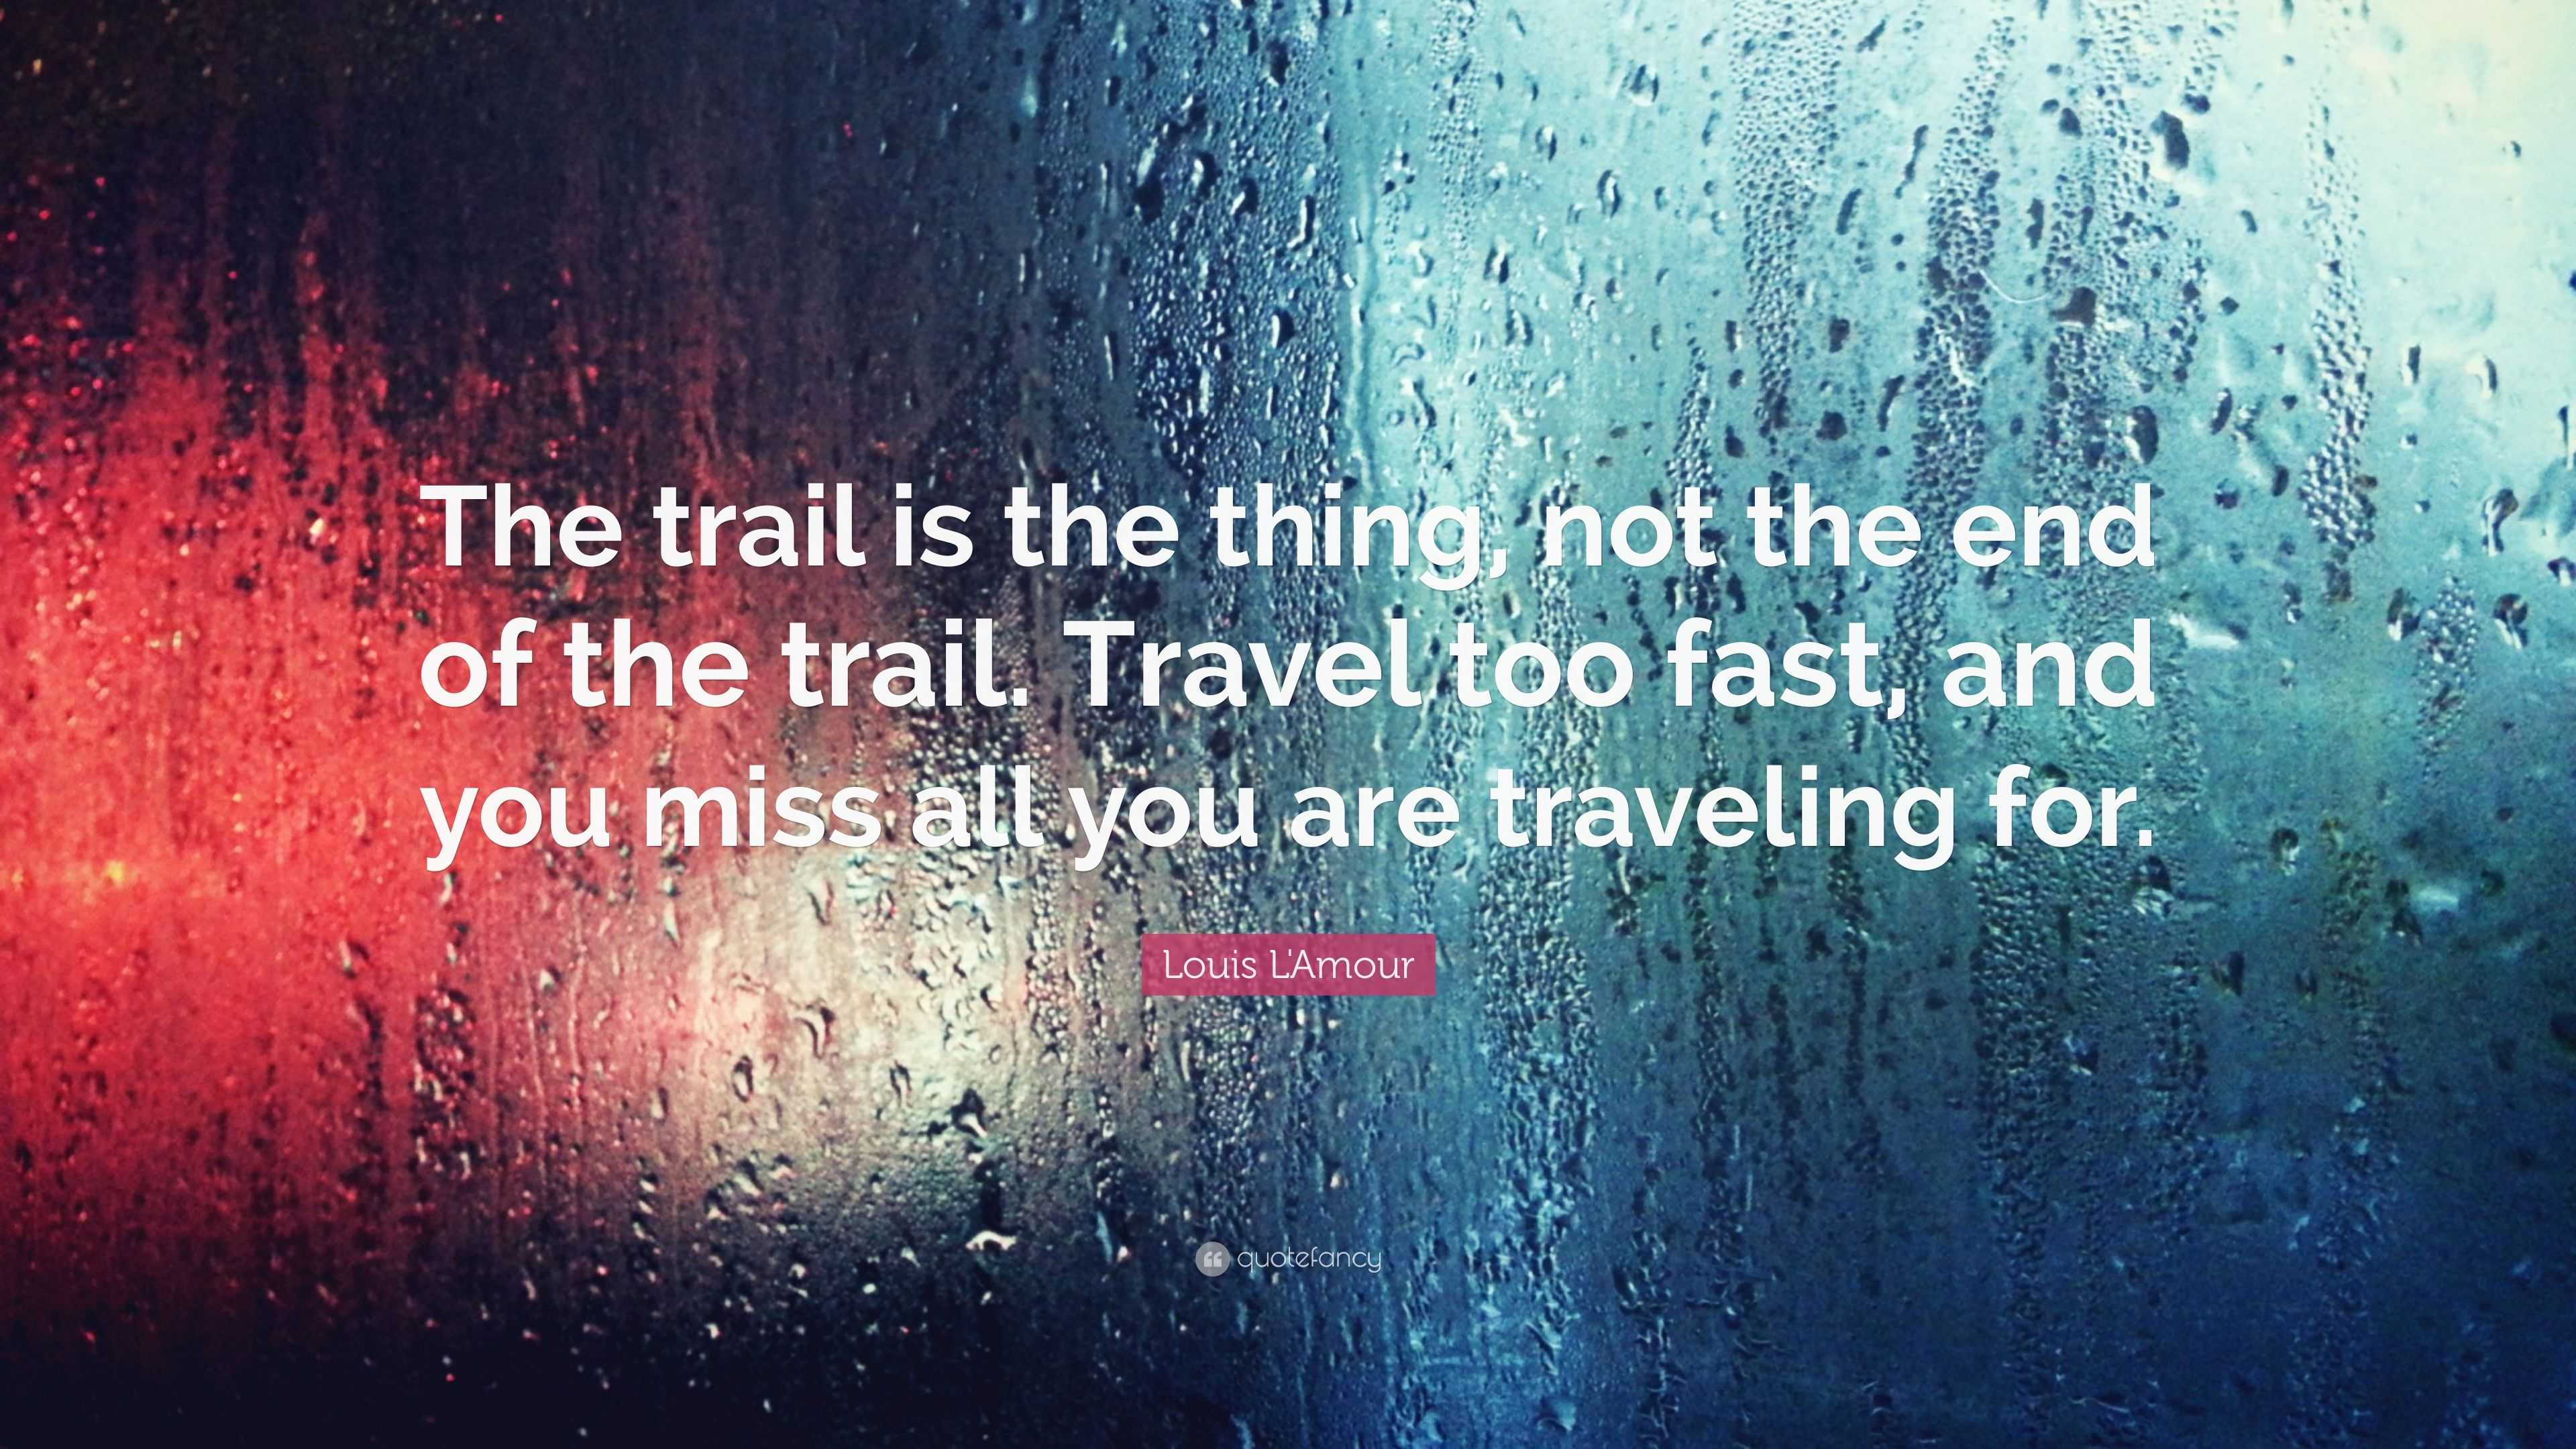 Louis L&#39;Amour Quote: “The trail is the thing, not the end of the trail. Travel too fast, and you ...